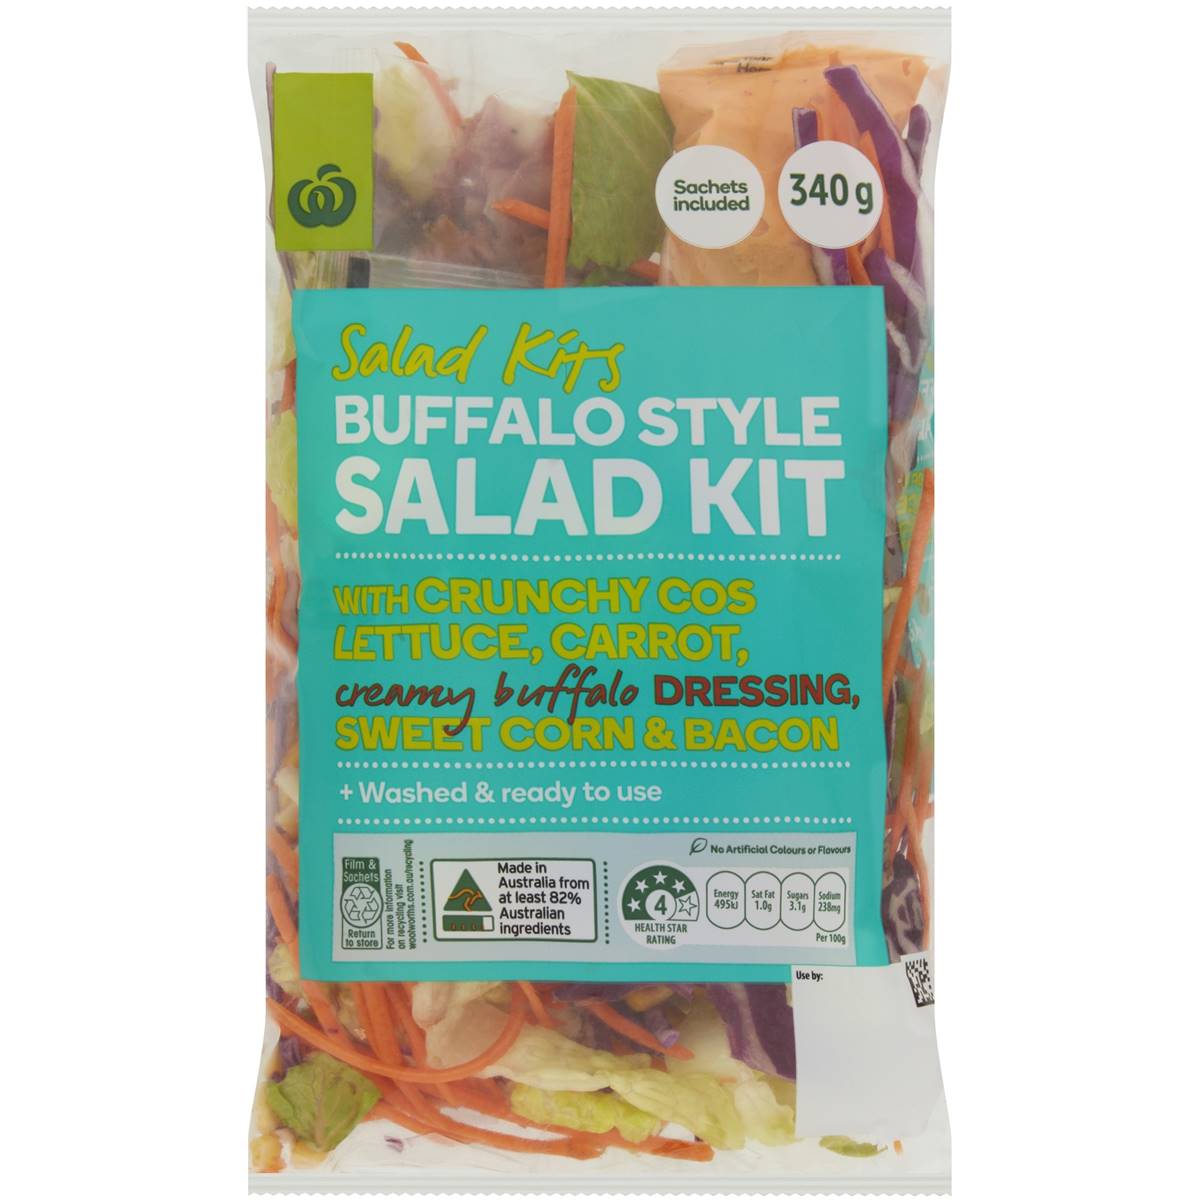 Calories in Woolworths Buffalo Style Salad Kit